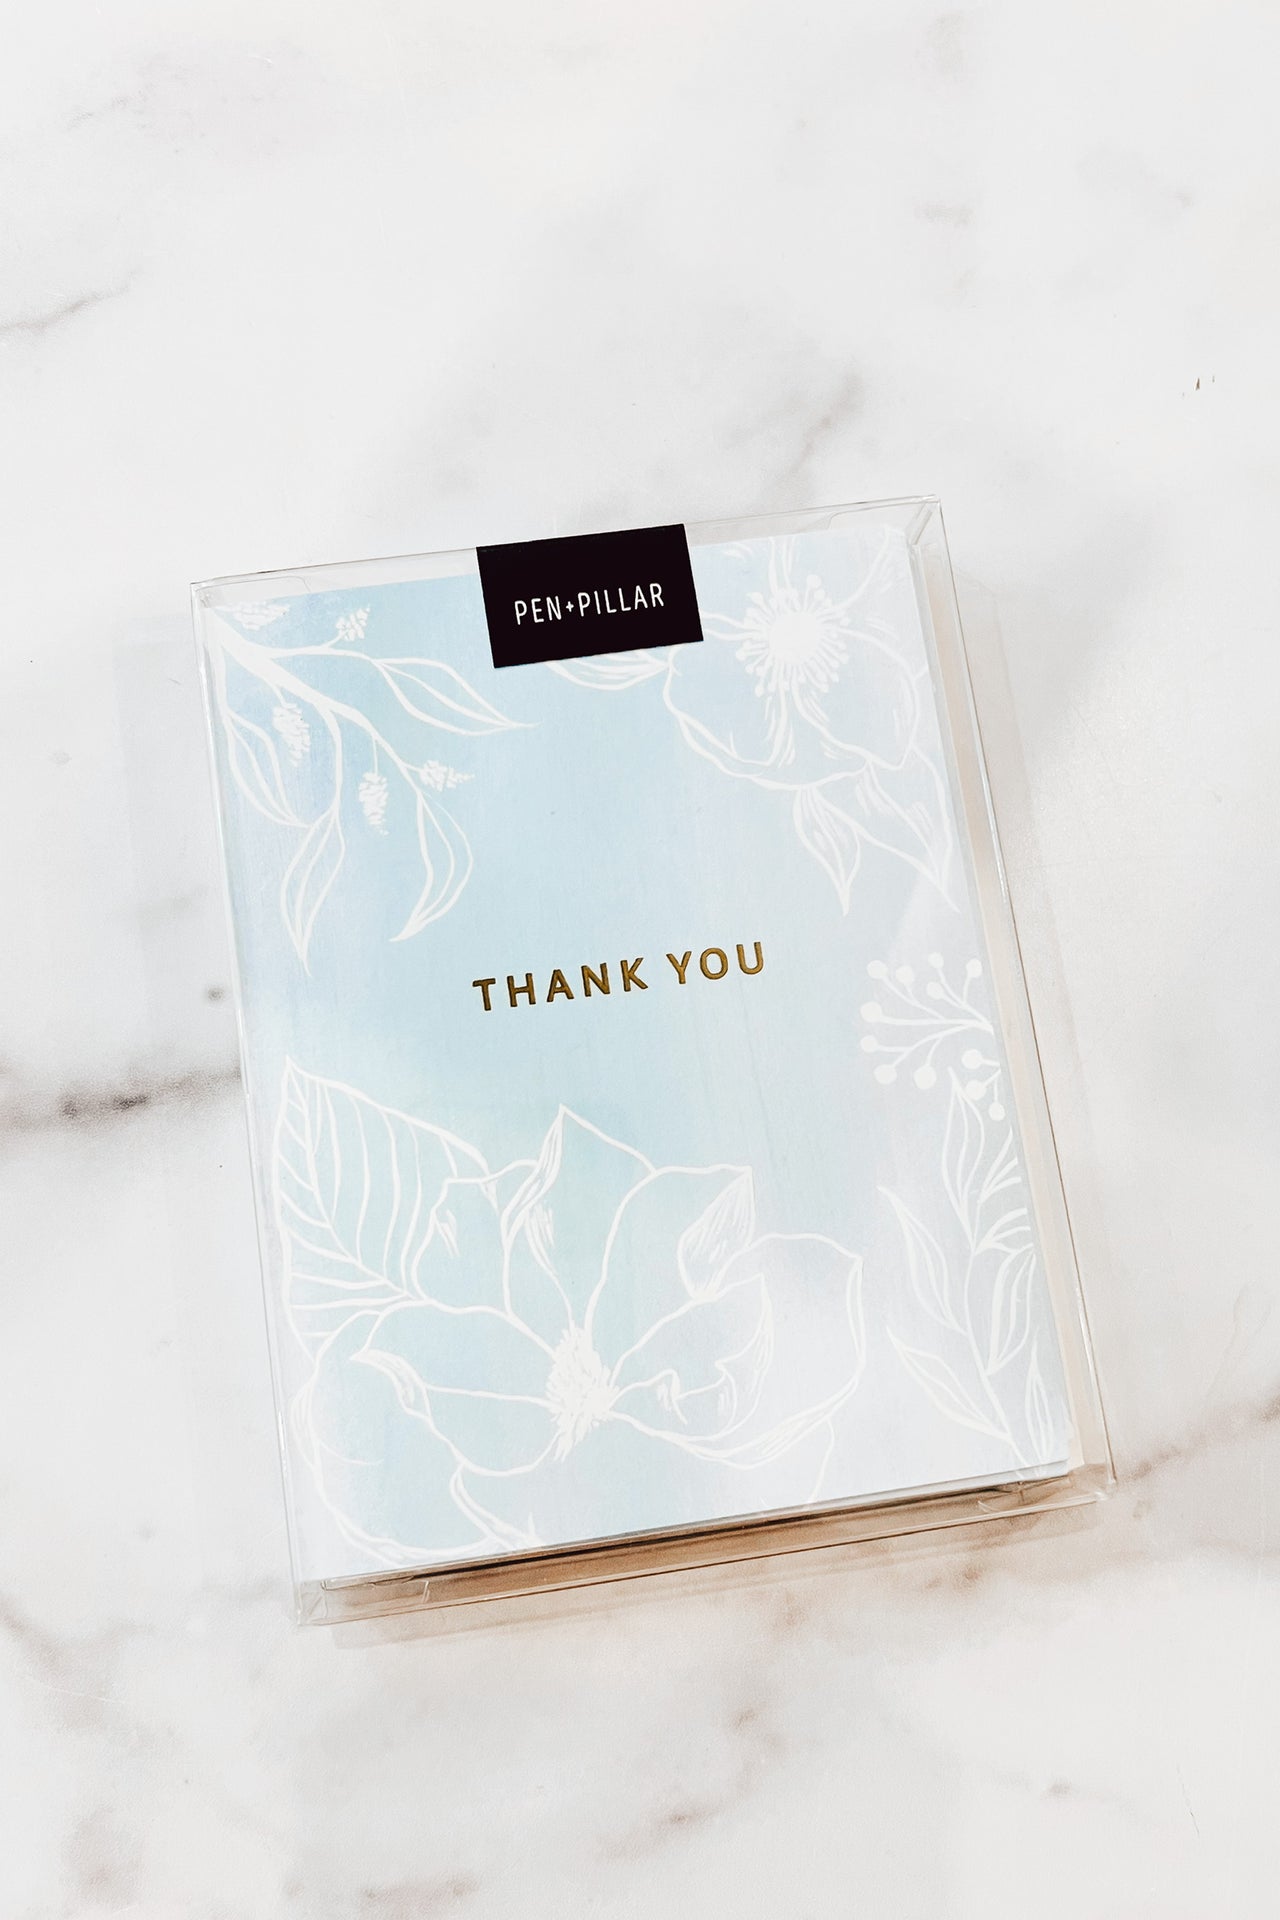 Blue Floral Garden Thank You Greeting Card - Set of 8